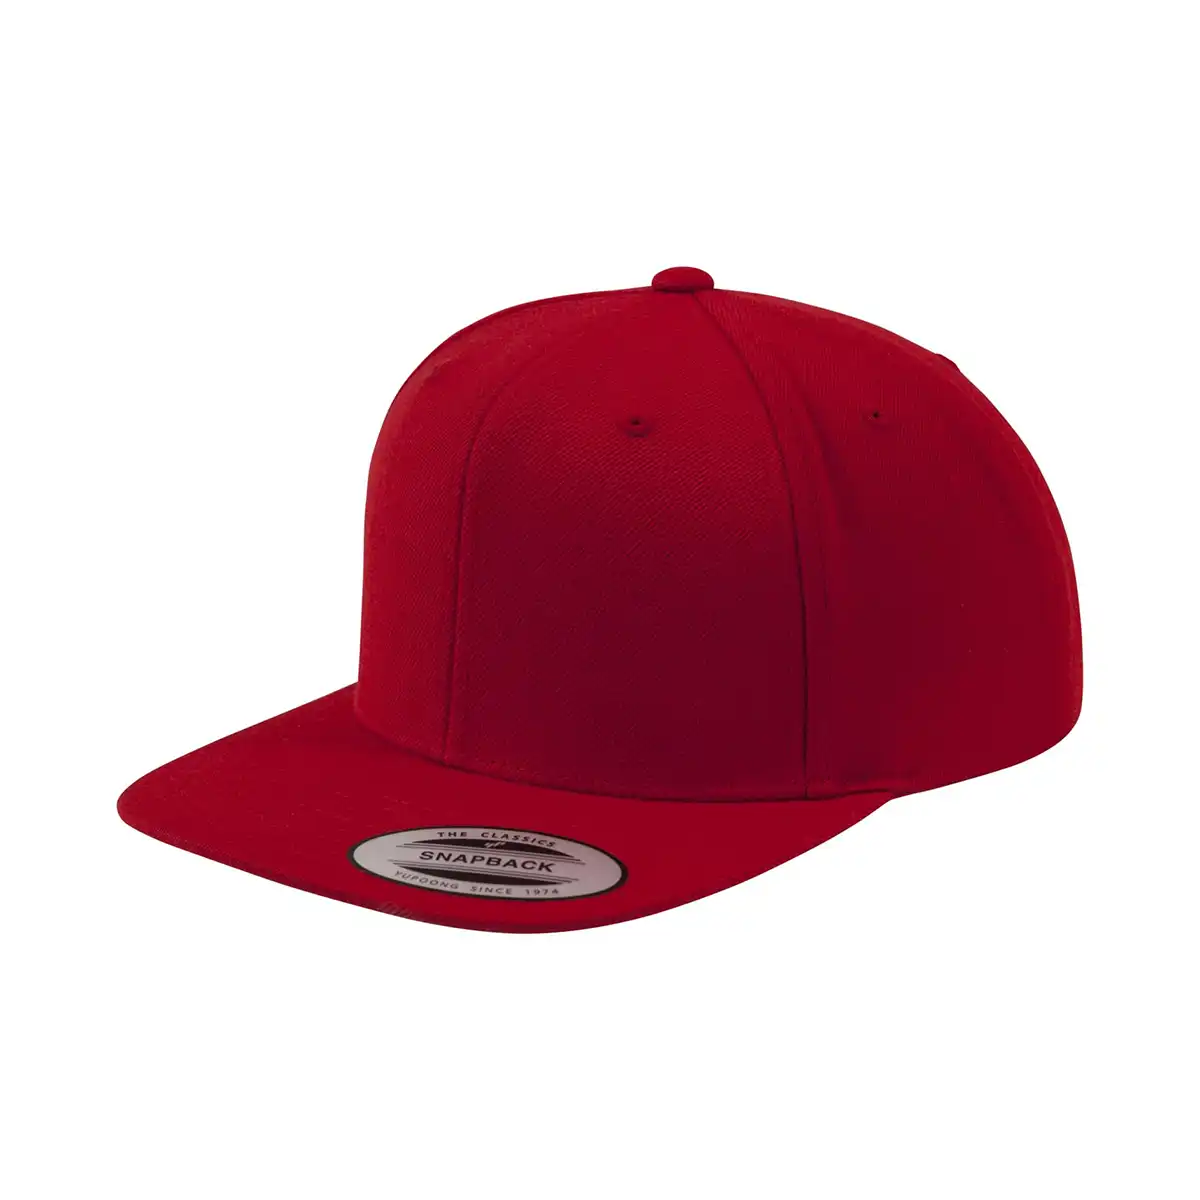 red/red classic snapback flexfit